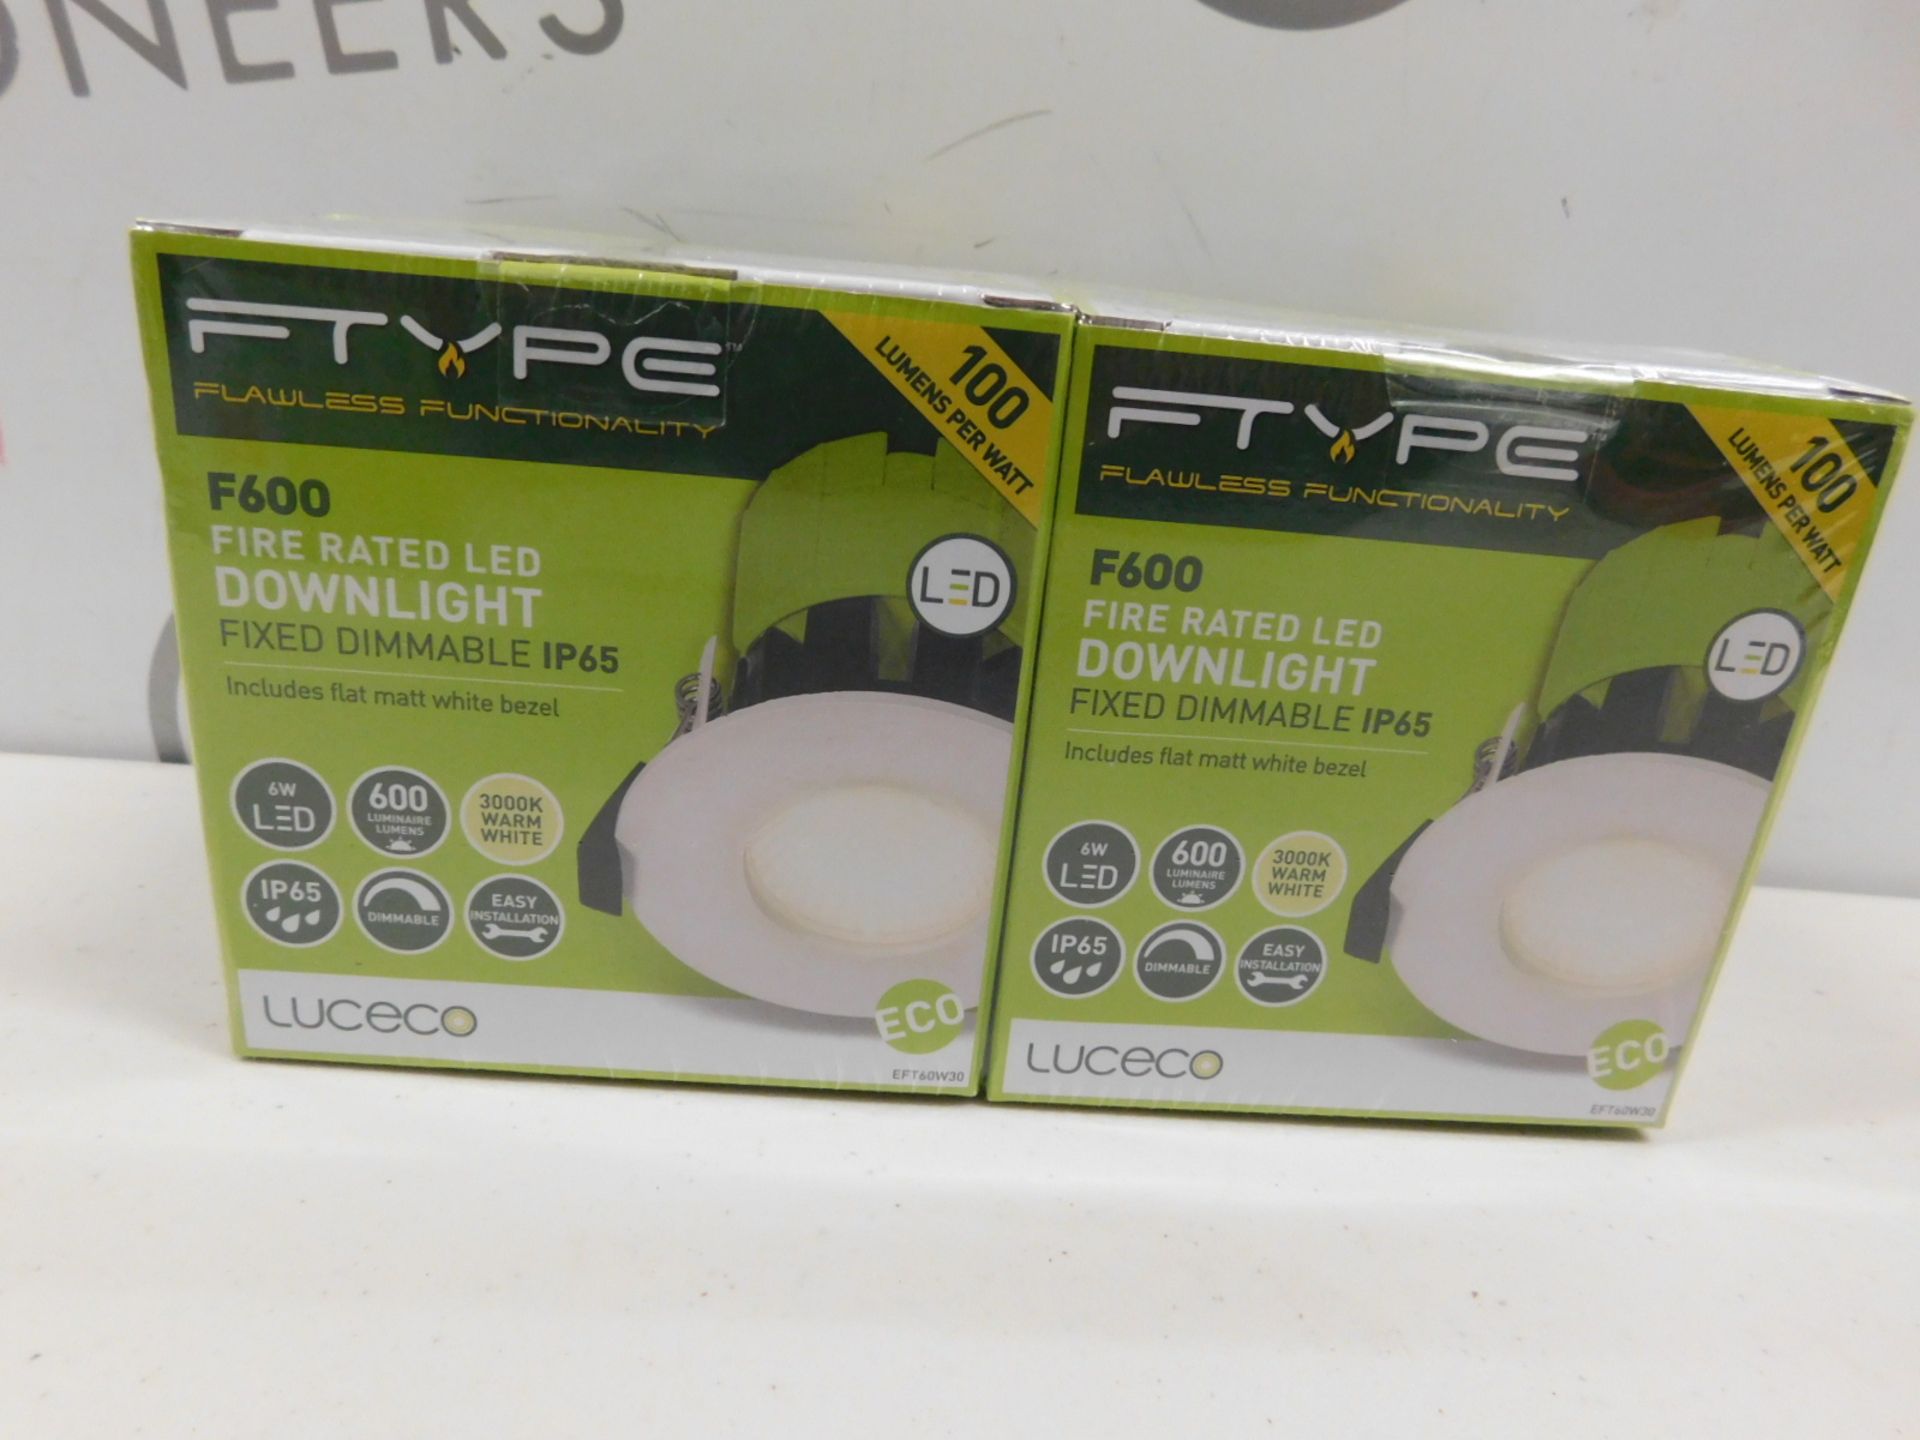 1 BRAND NEW SEALED PACK OF 2 FTYPE F600 FIRE RATED LED DOWNLIGHT RRP £29.99